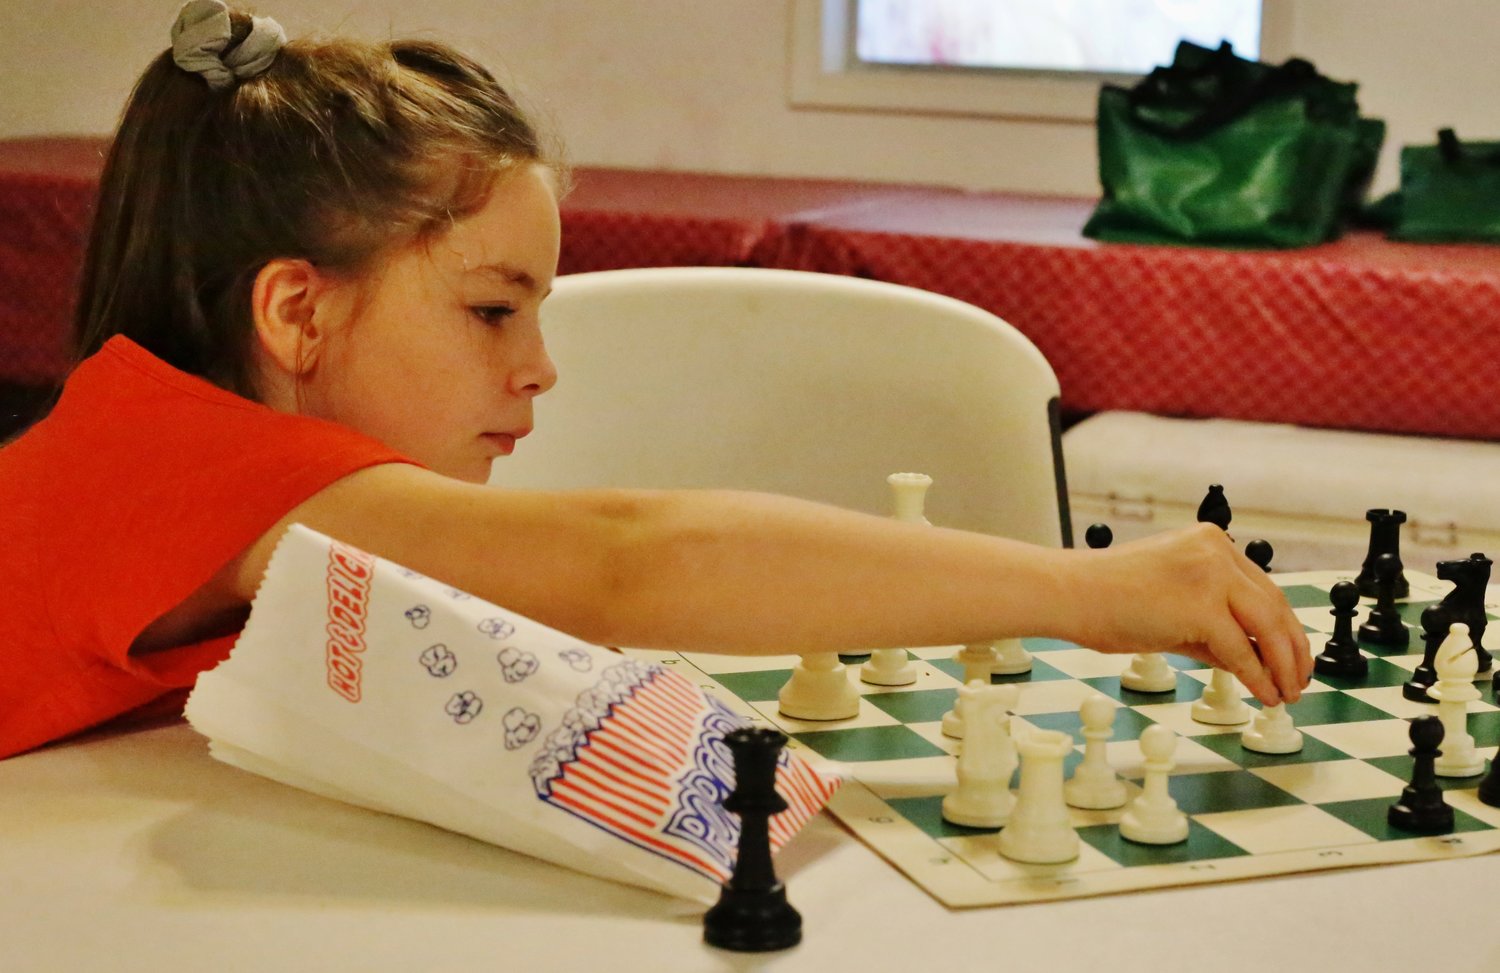 A young member of the Strobel family makes an early move in her first match of the evening.